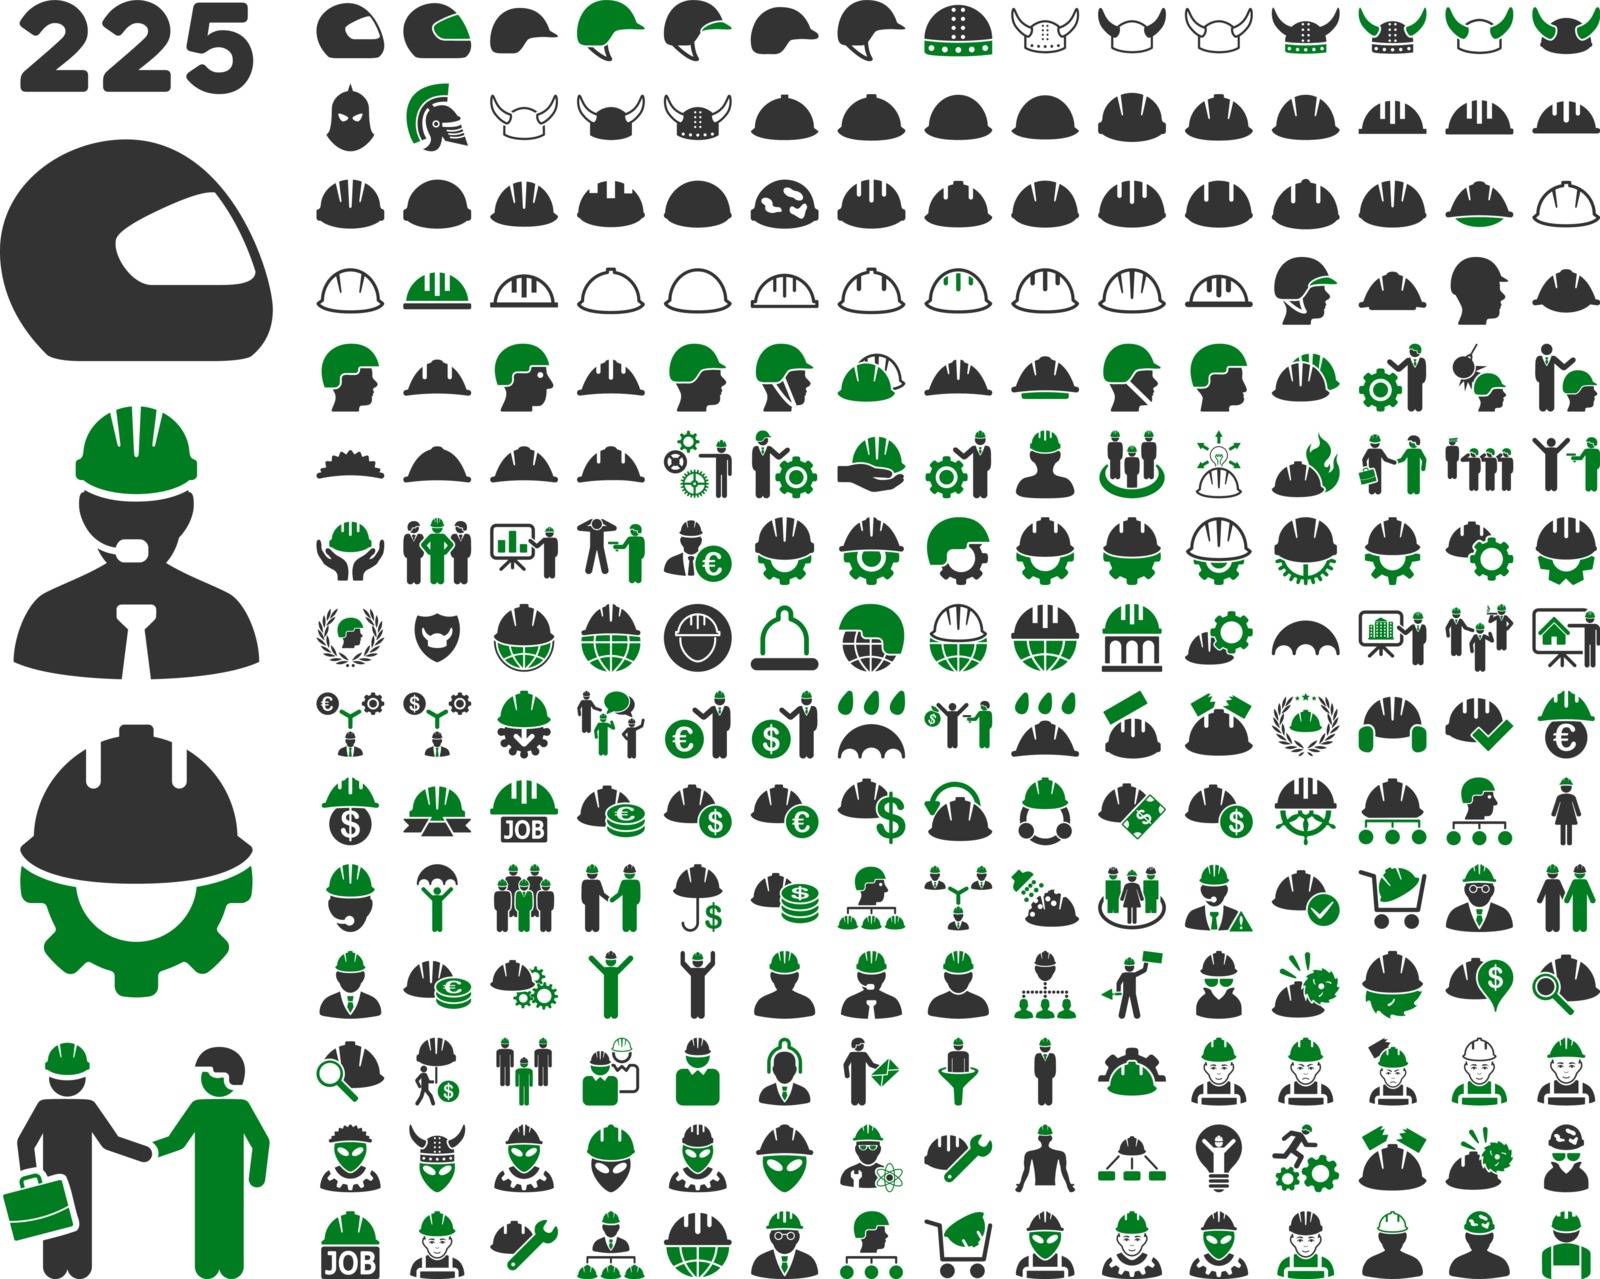 Work Safety and Helmet Icon Set. These flat bicolor icons use green and gray colors. Vector images are isolated on a white background. 